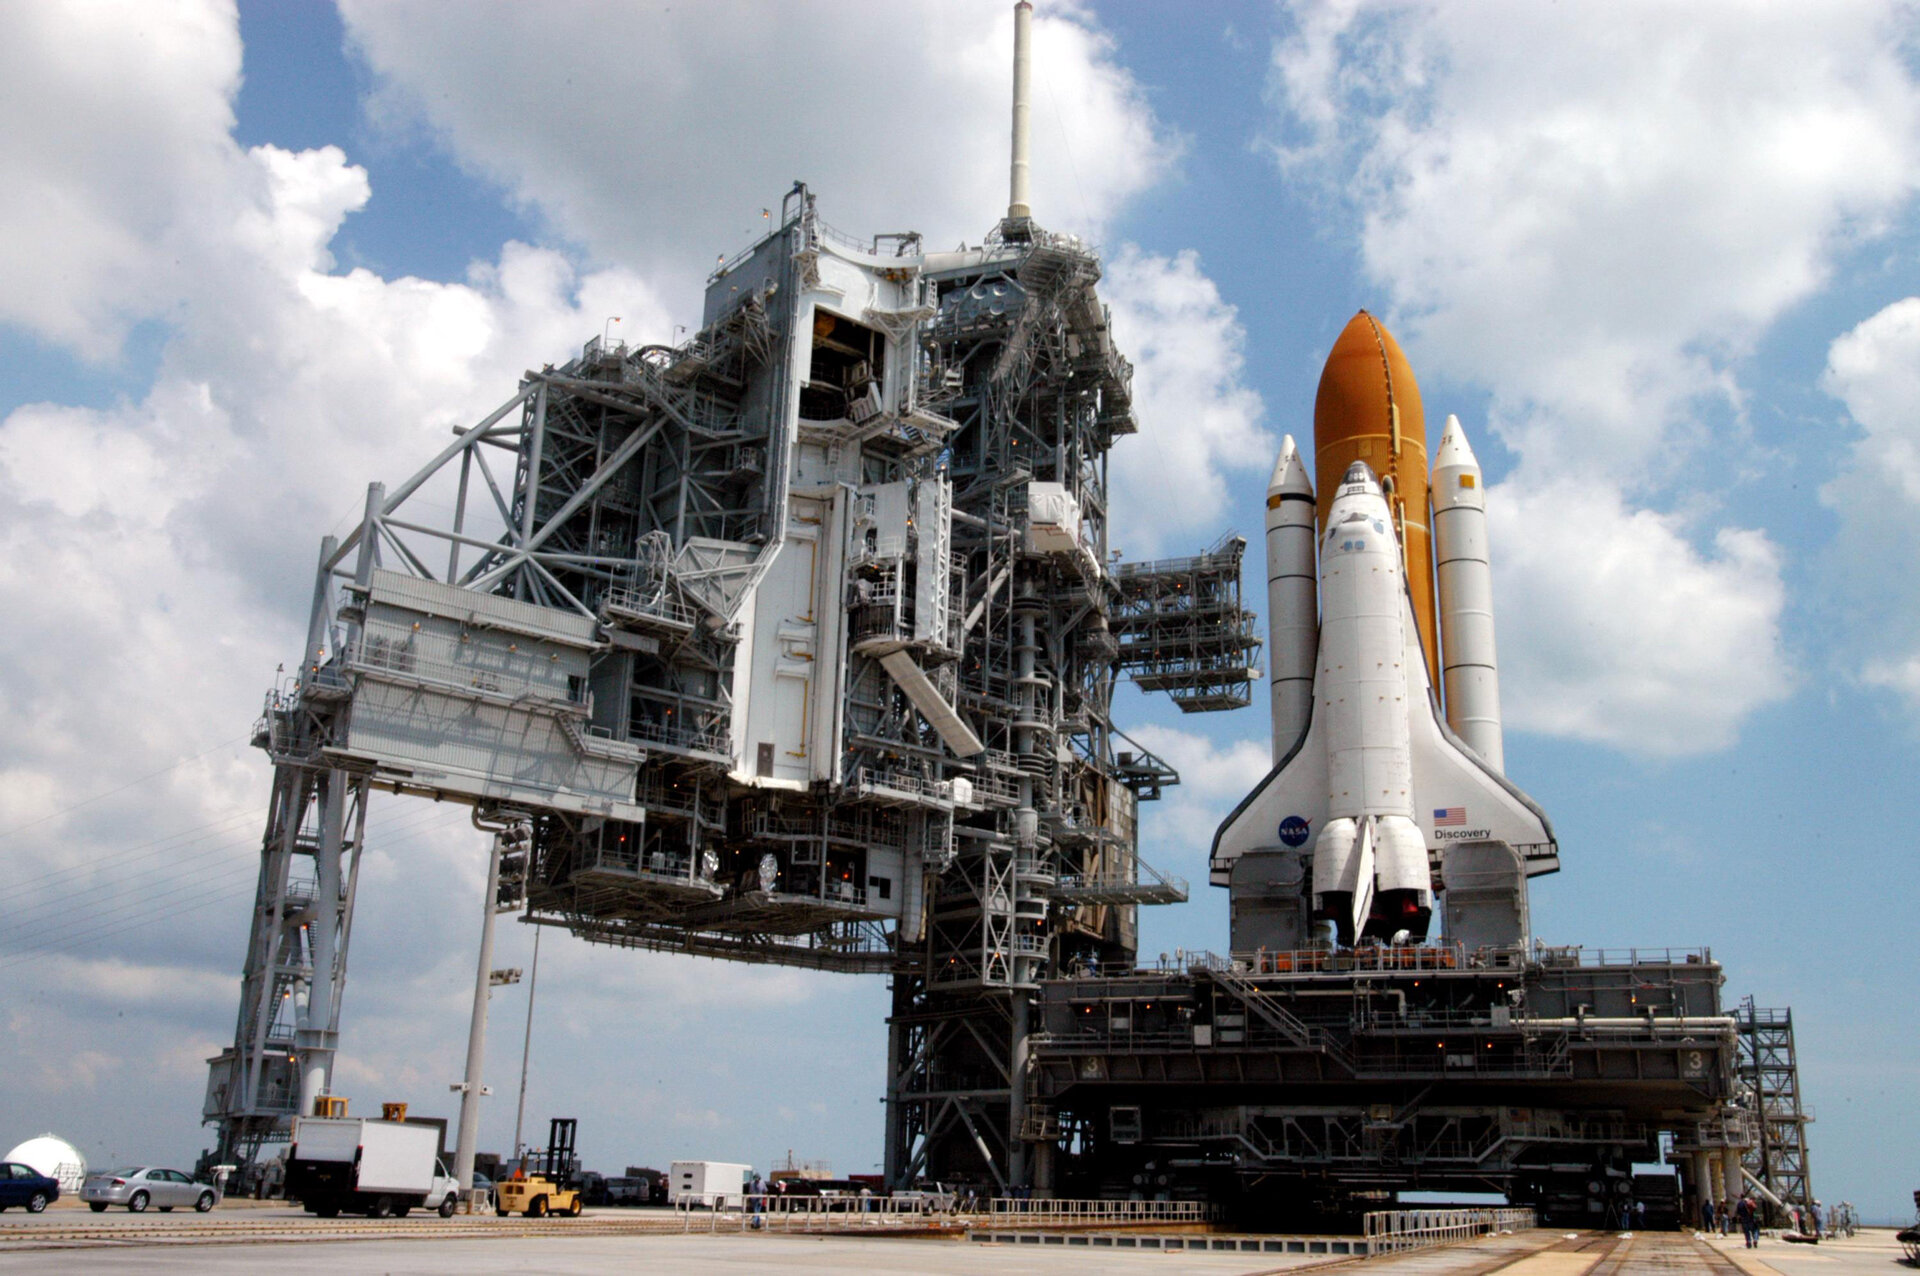 Space Shuttle Discovery is due to lift off from KSC at 21:49 CEST on 1 July 2006